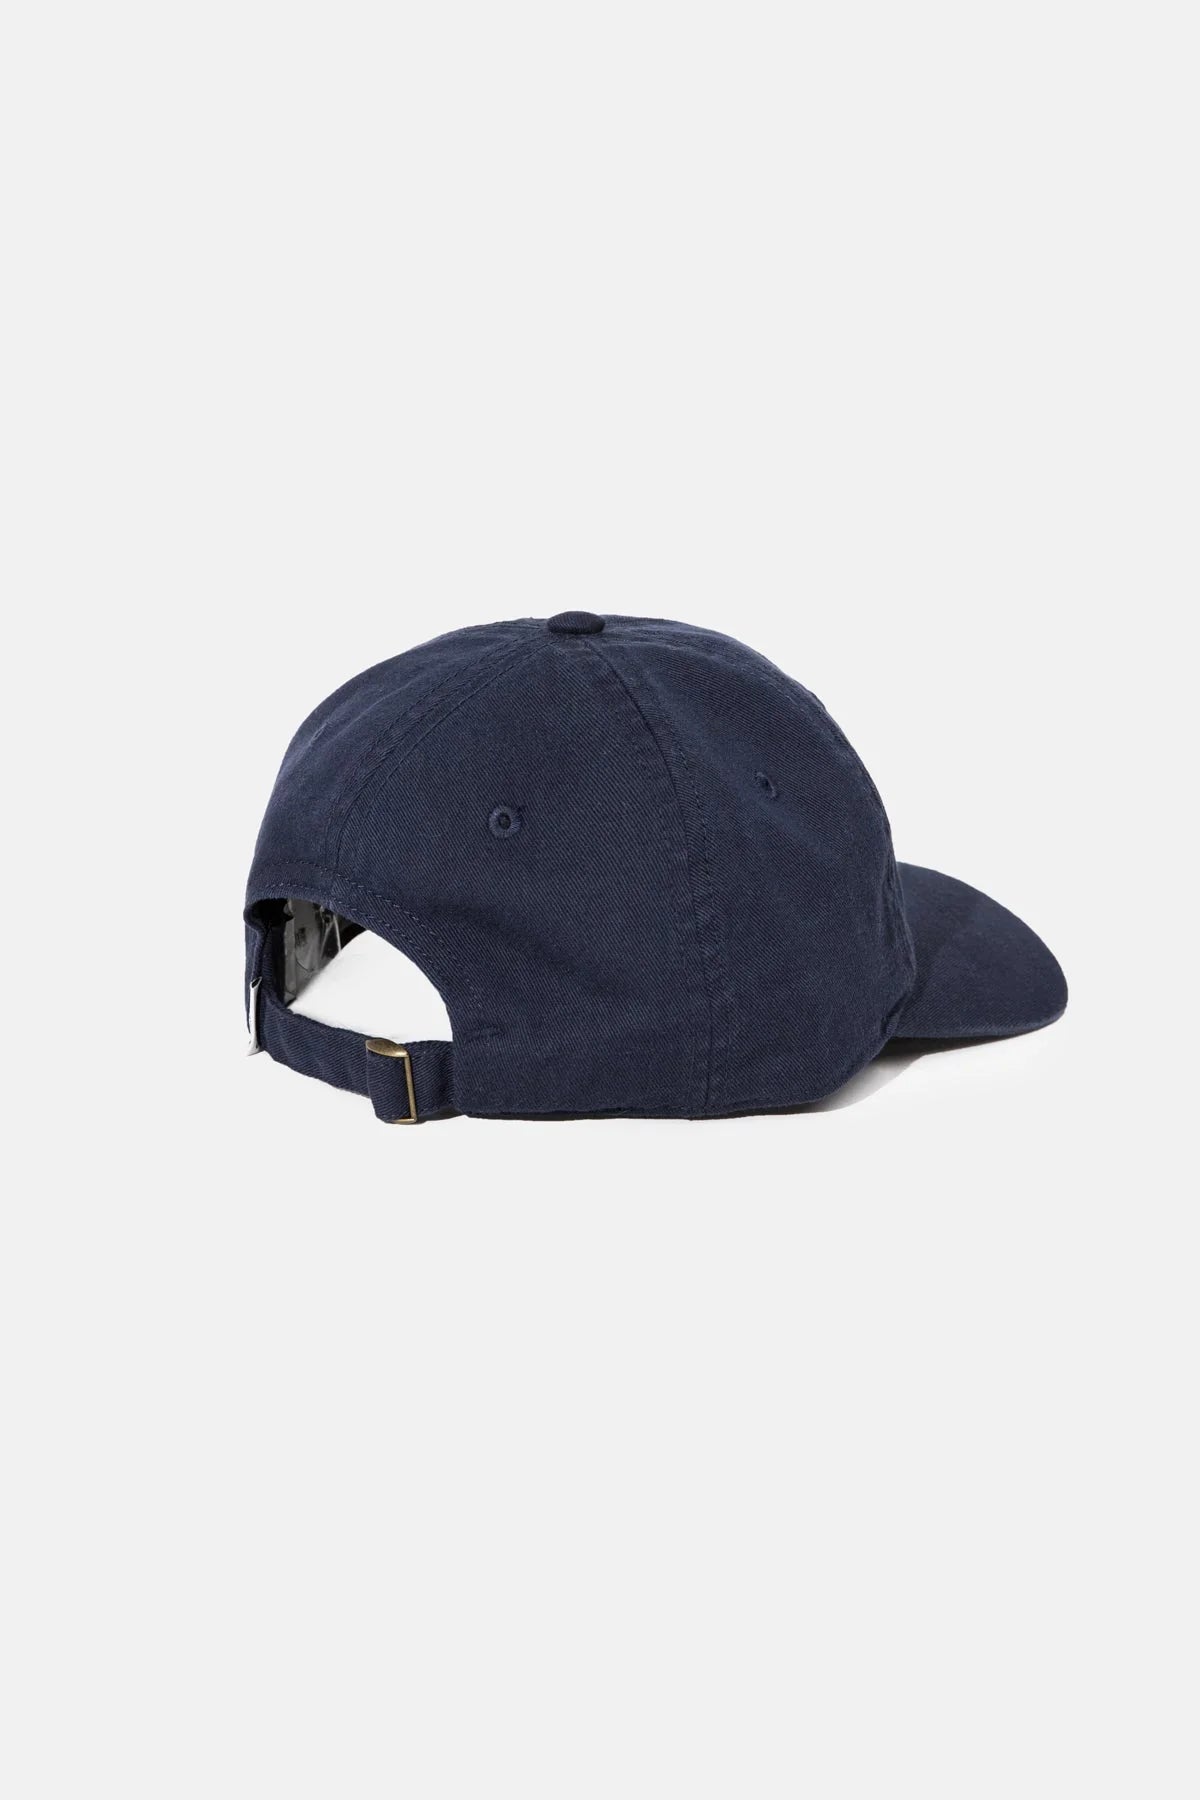 back view of a 5 panel cap by Rhythm in color Worn Navy